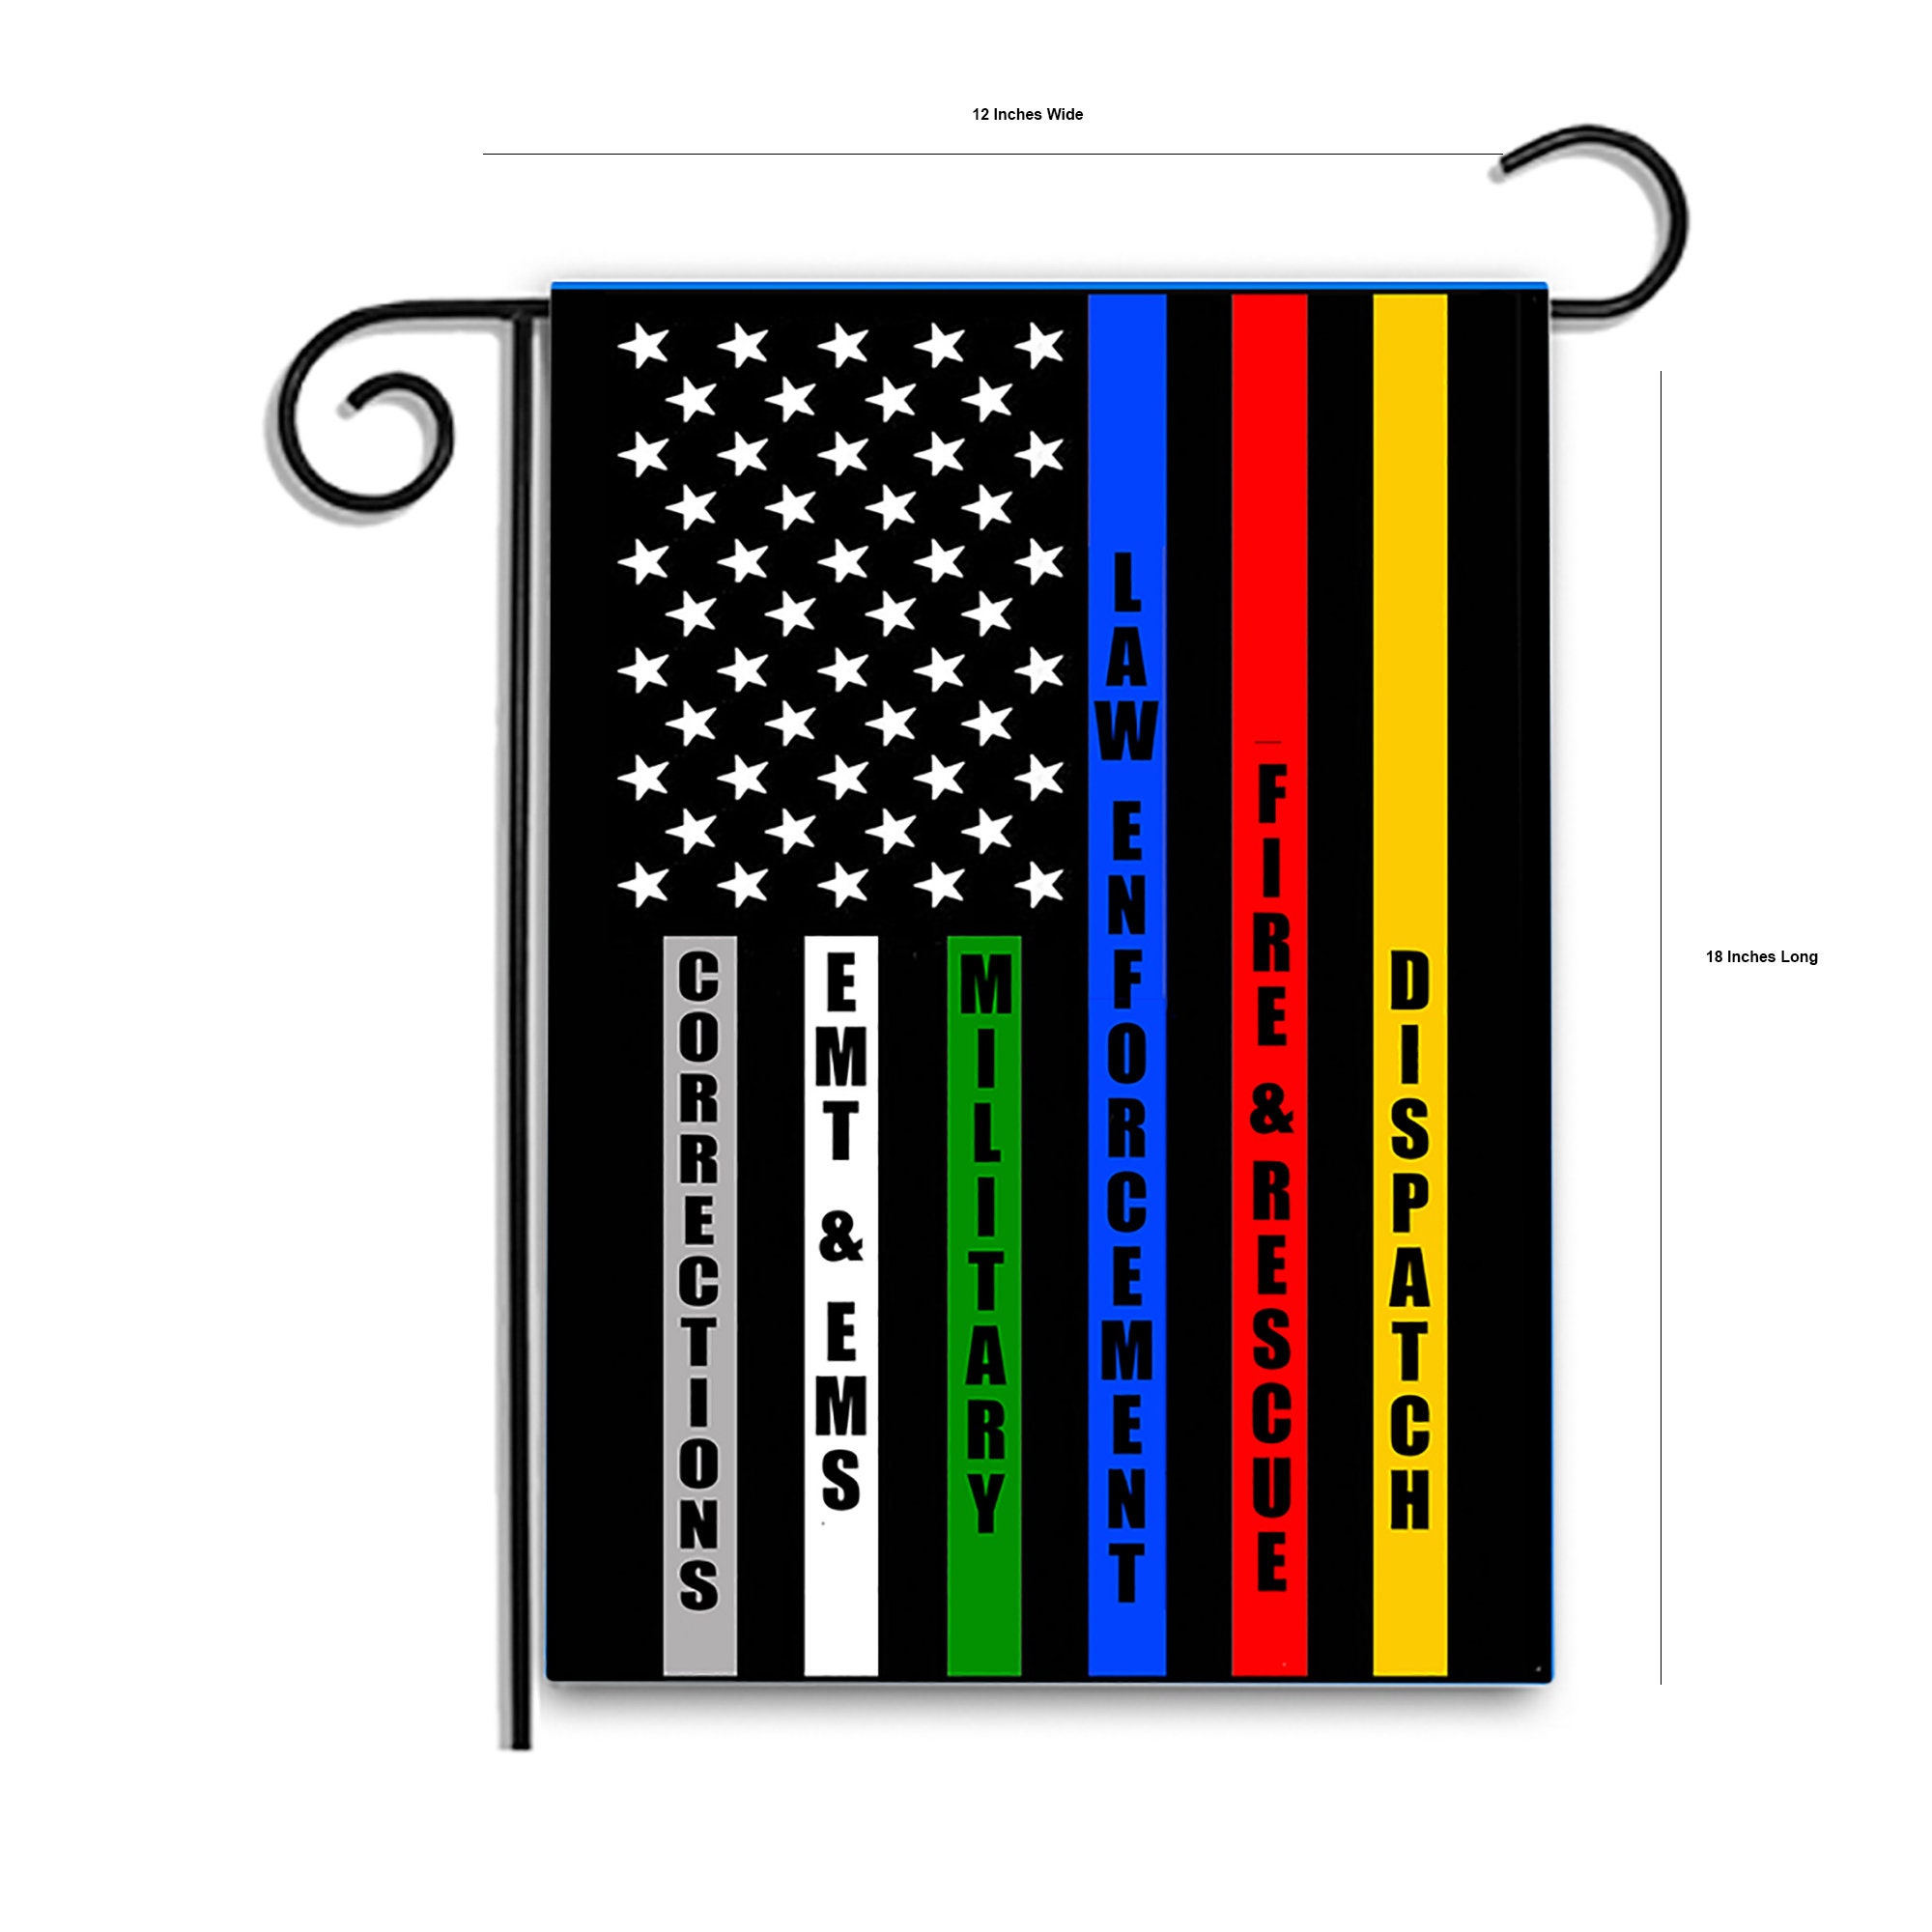 US Flag with Security, Armed Forces, Corrections, Law Enforcement